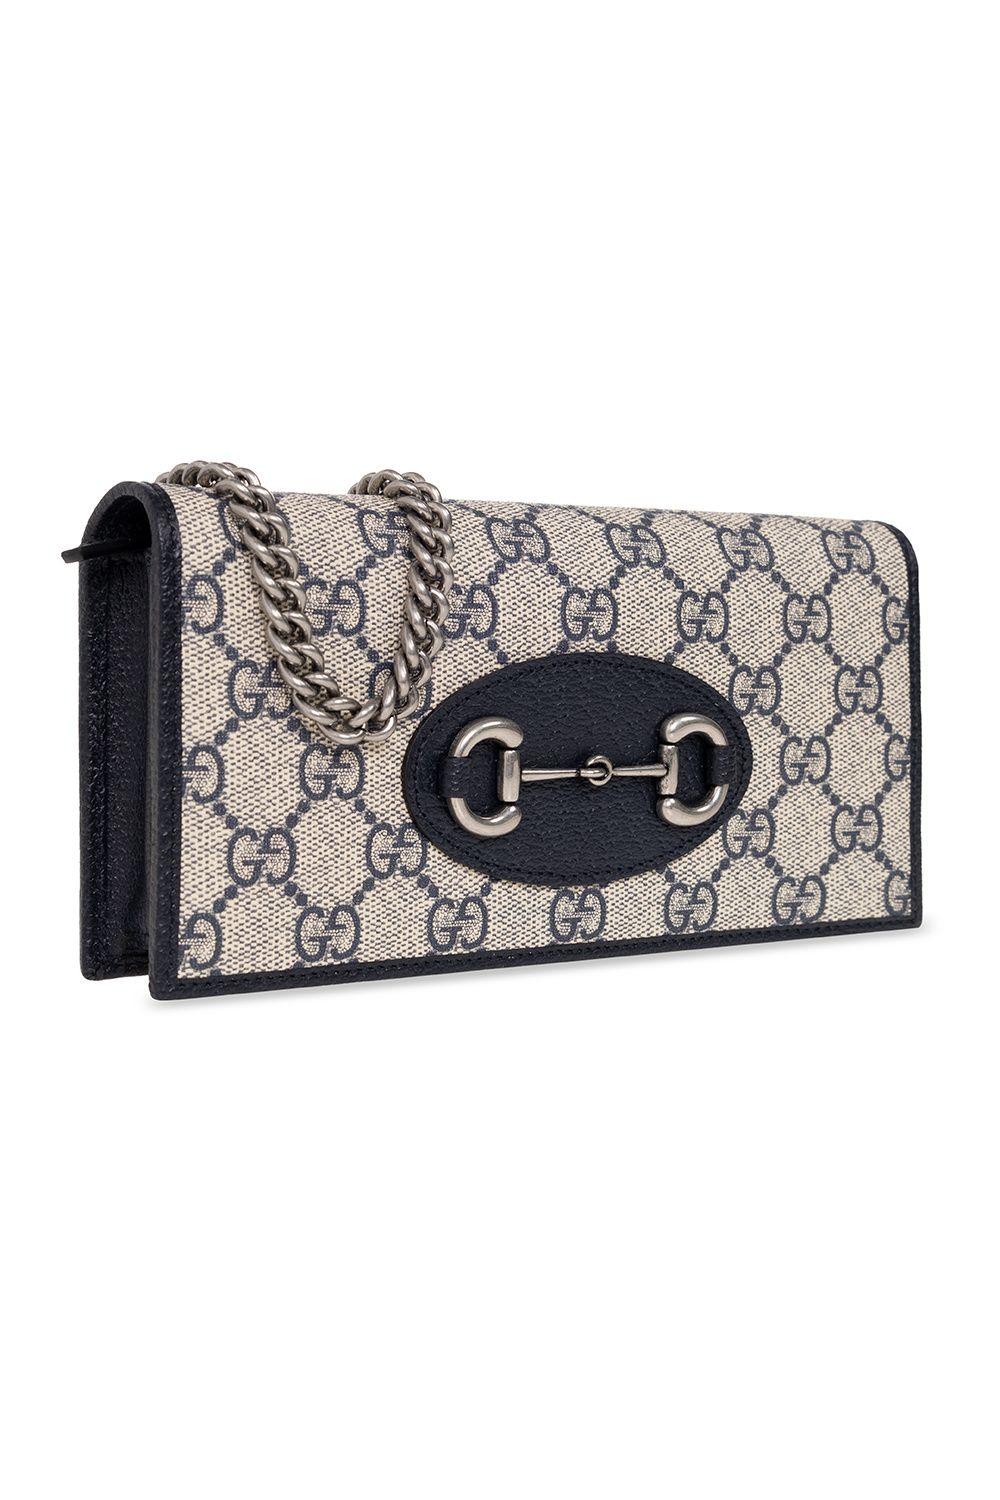 Gucci Horsebit 1955 wallet with chain in GG Supreme